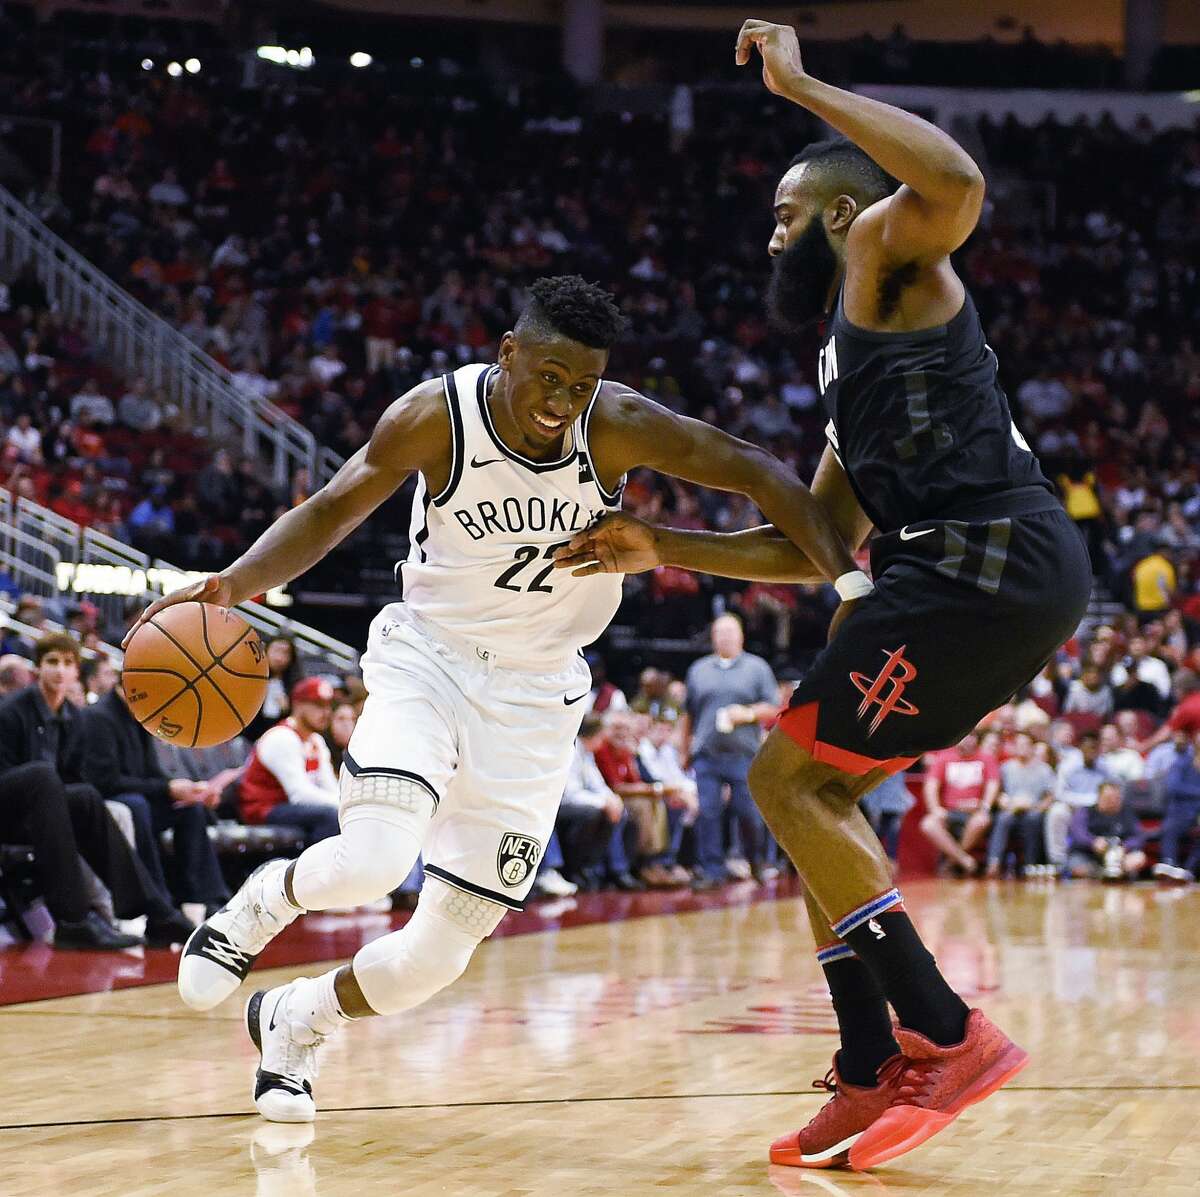 Brooklyn Nets guard Caris LeVert (22) drives past Houston Rockets guard James Harden during the second half of an NBA basketball game, Monday, Nov. 27, 2017, in Houston. Houston won the game 117-103. (AP Photo/Eric Christian Smith)